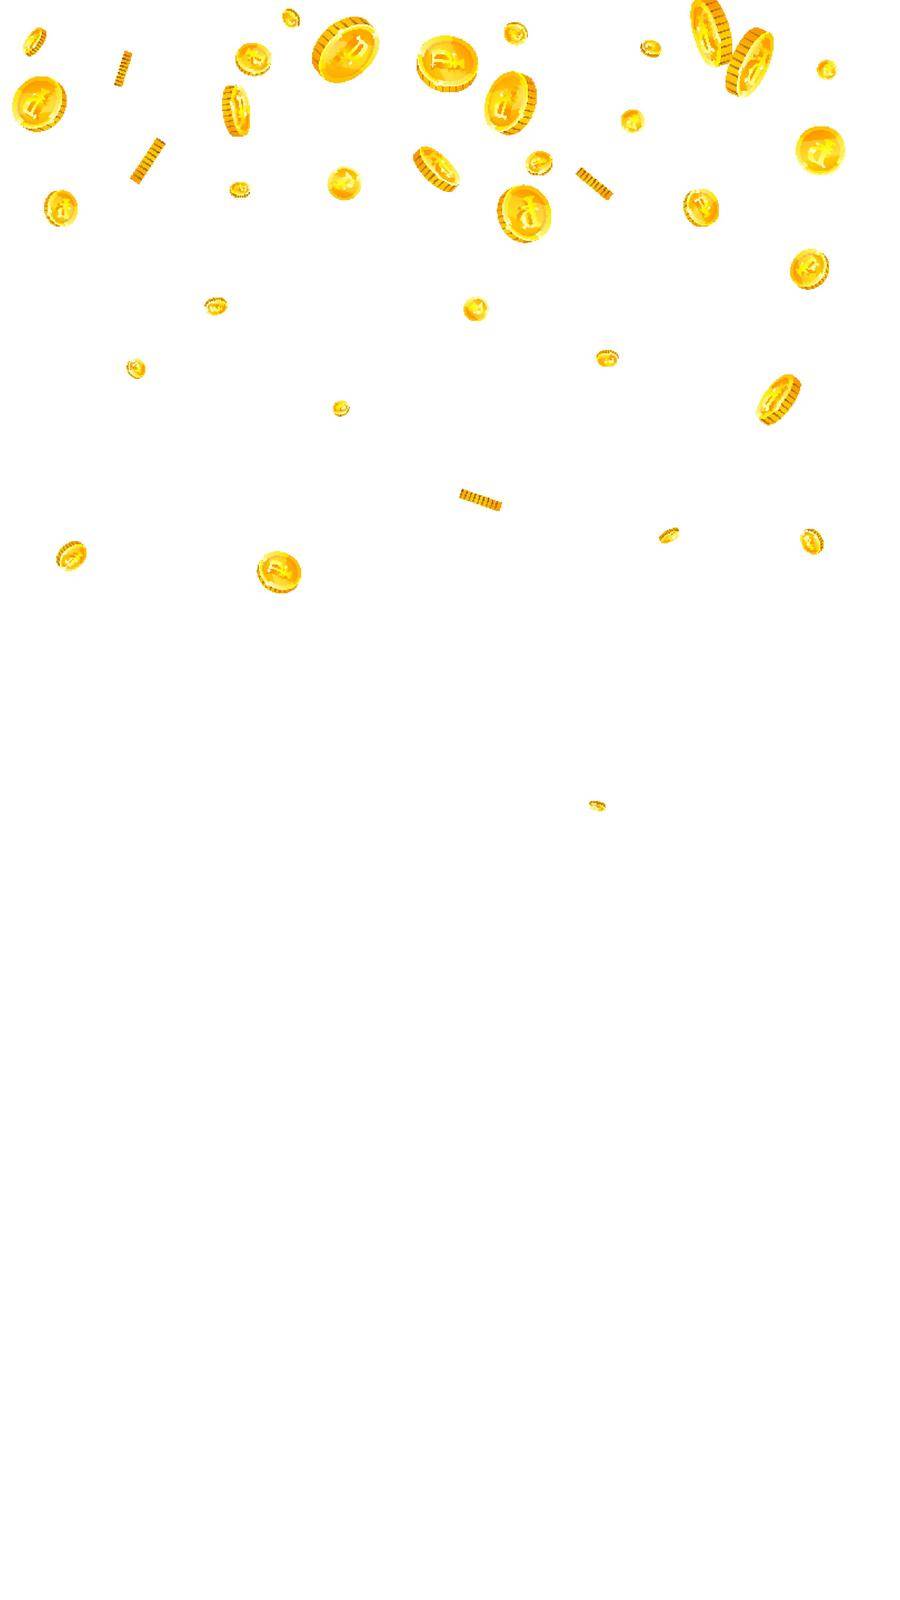 Russian ruble coins falling. Scattered gold RUB coins. Russia money. Great business success concept. Vector illustration.